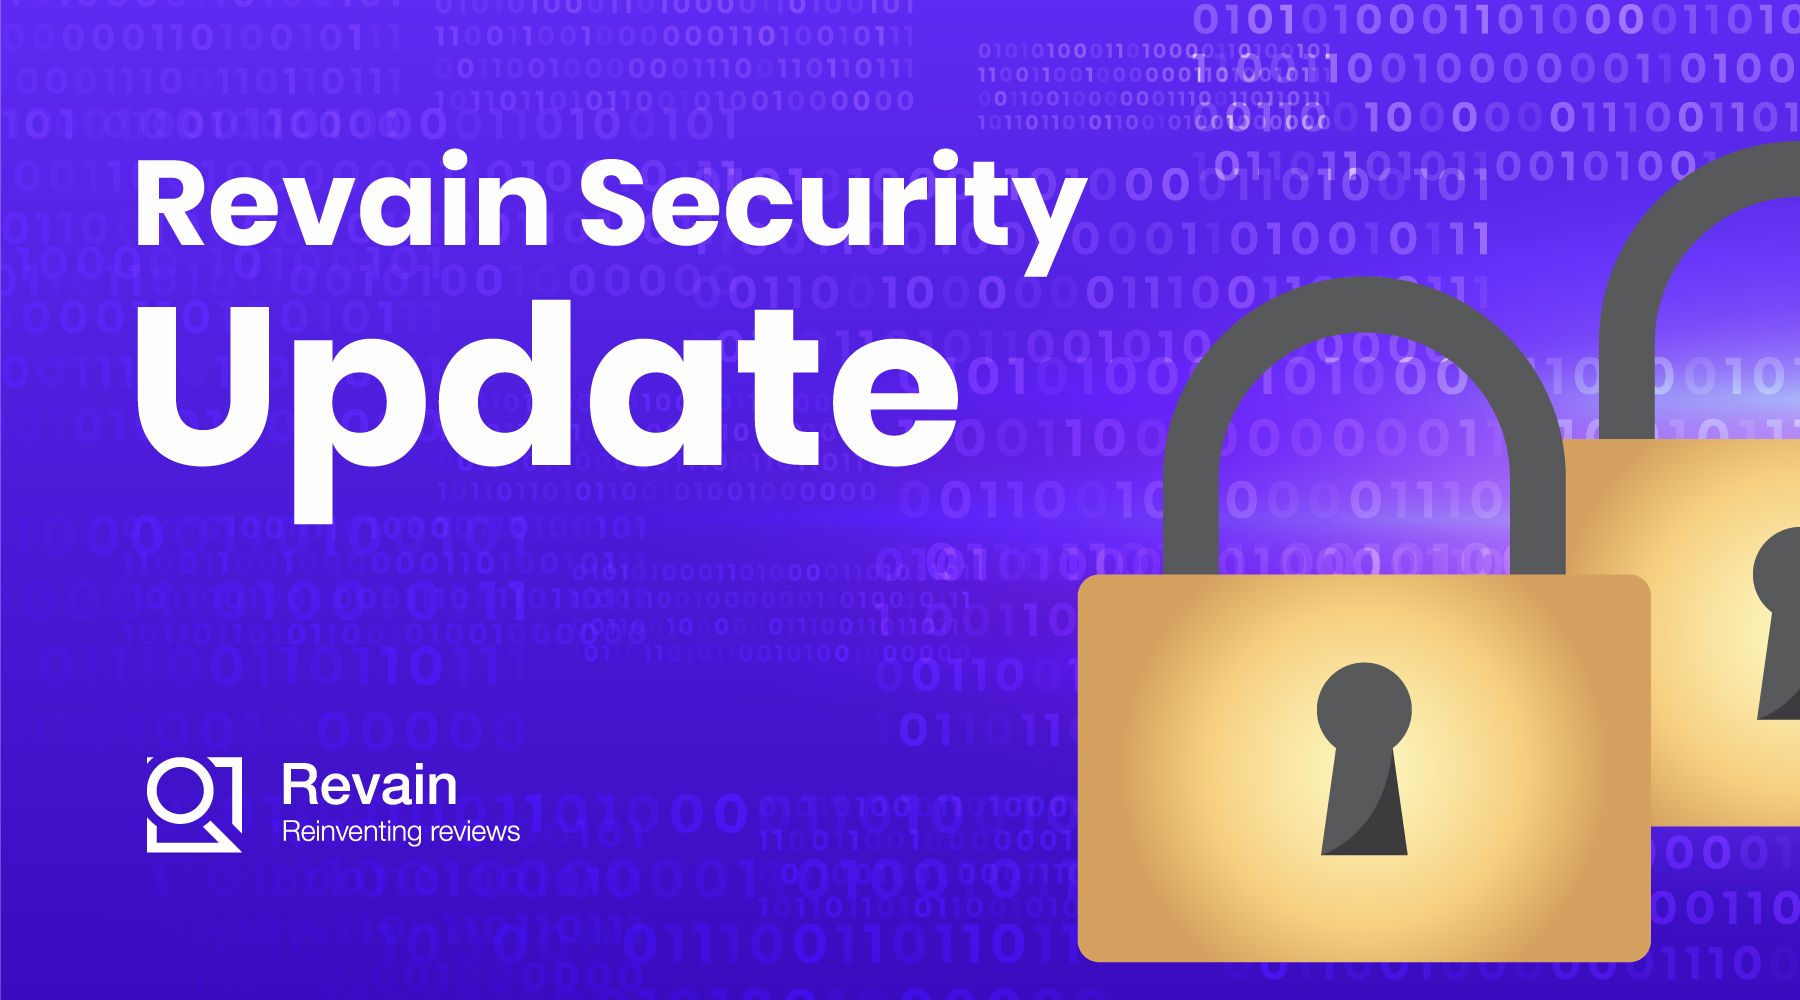 Article The security update is here!